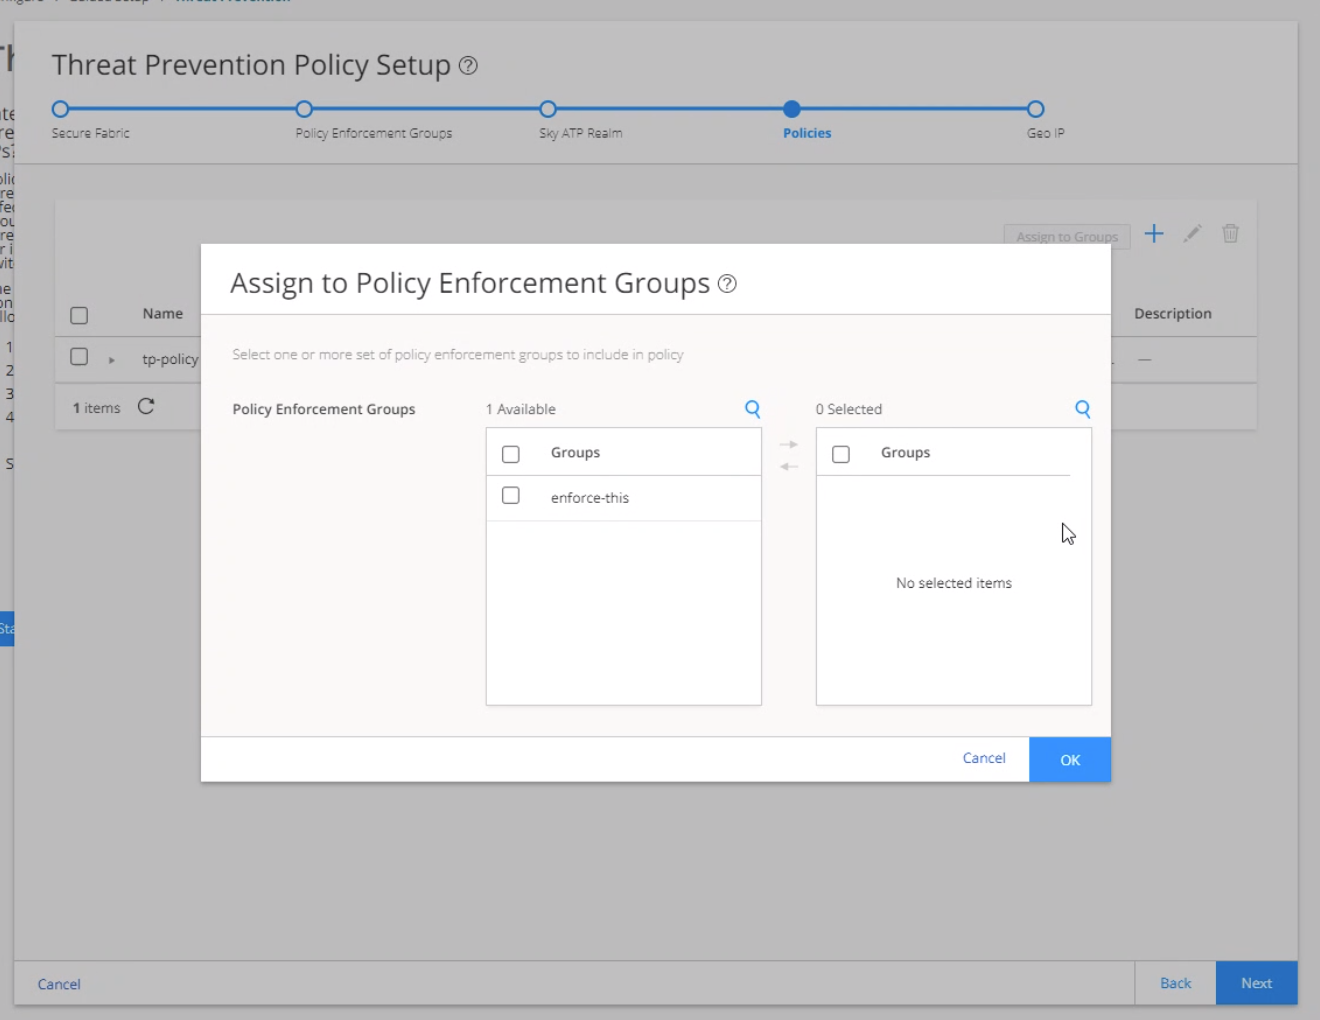 Assign to Policy Enforcement Groups